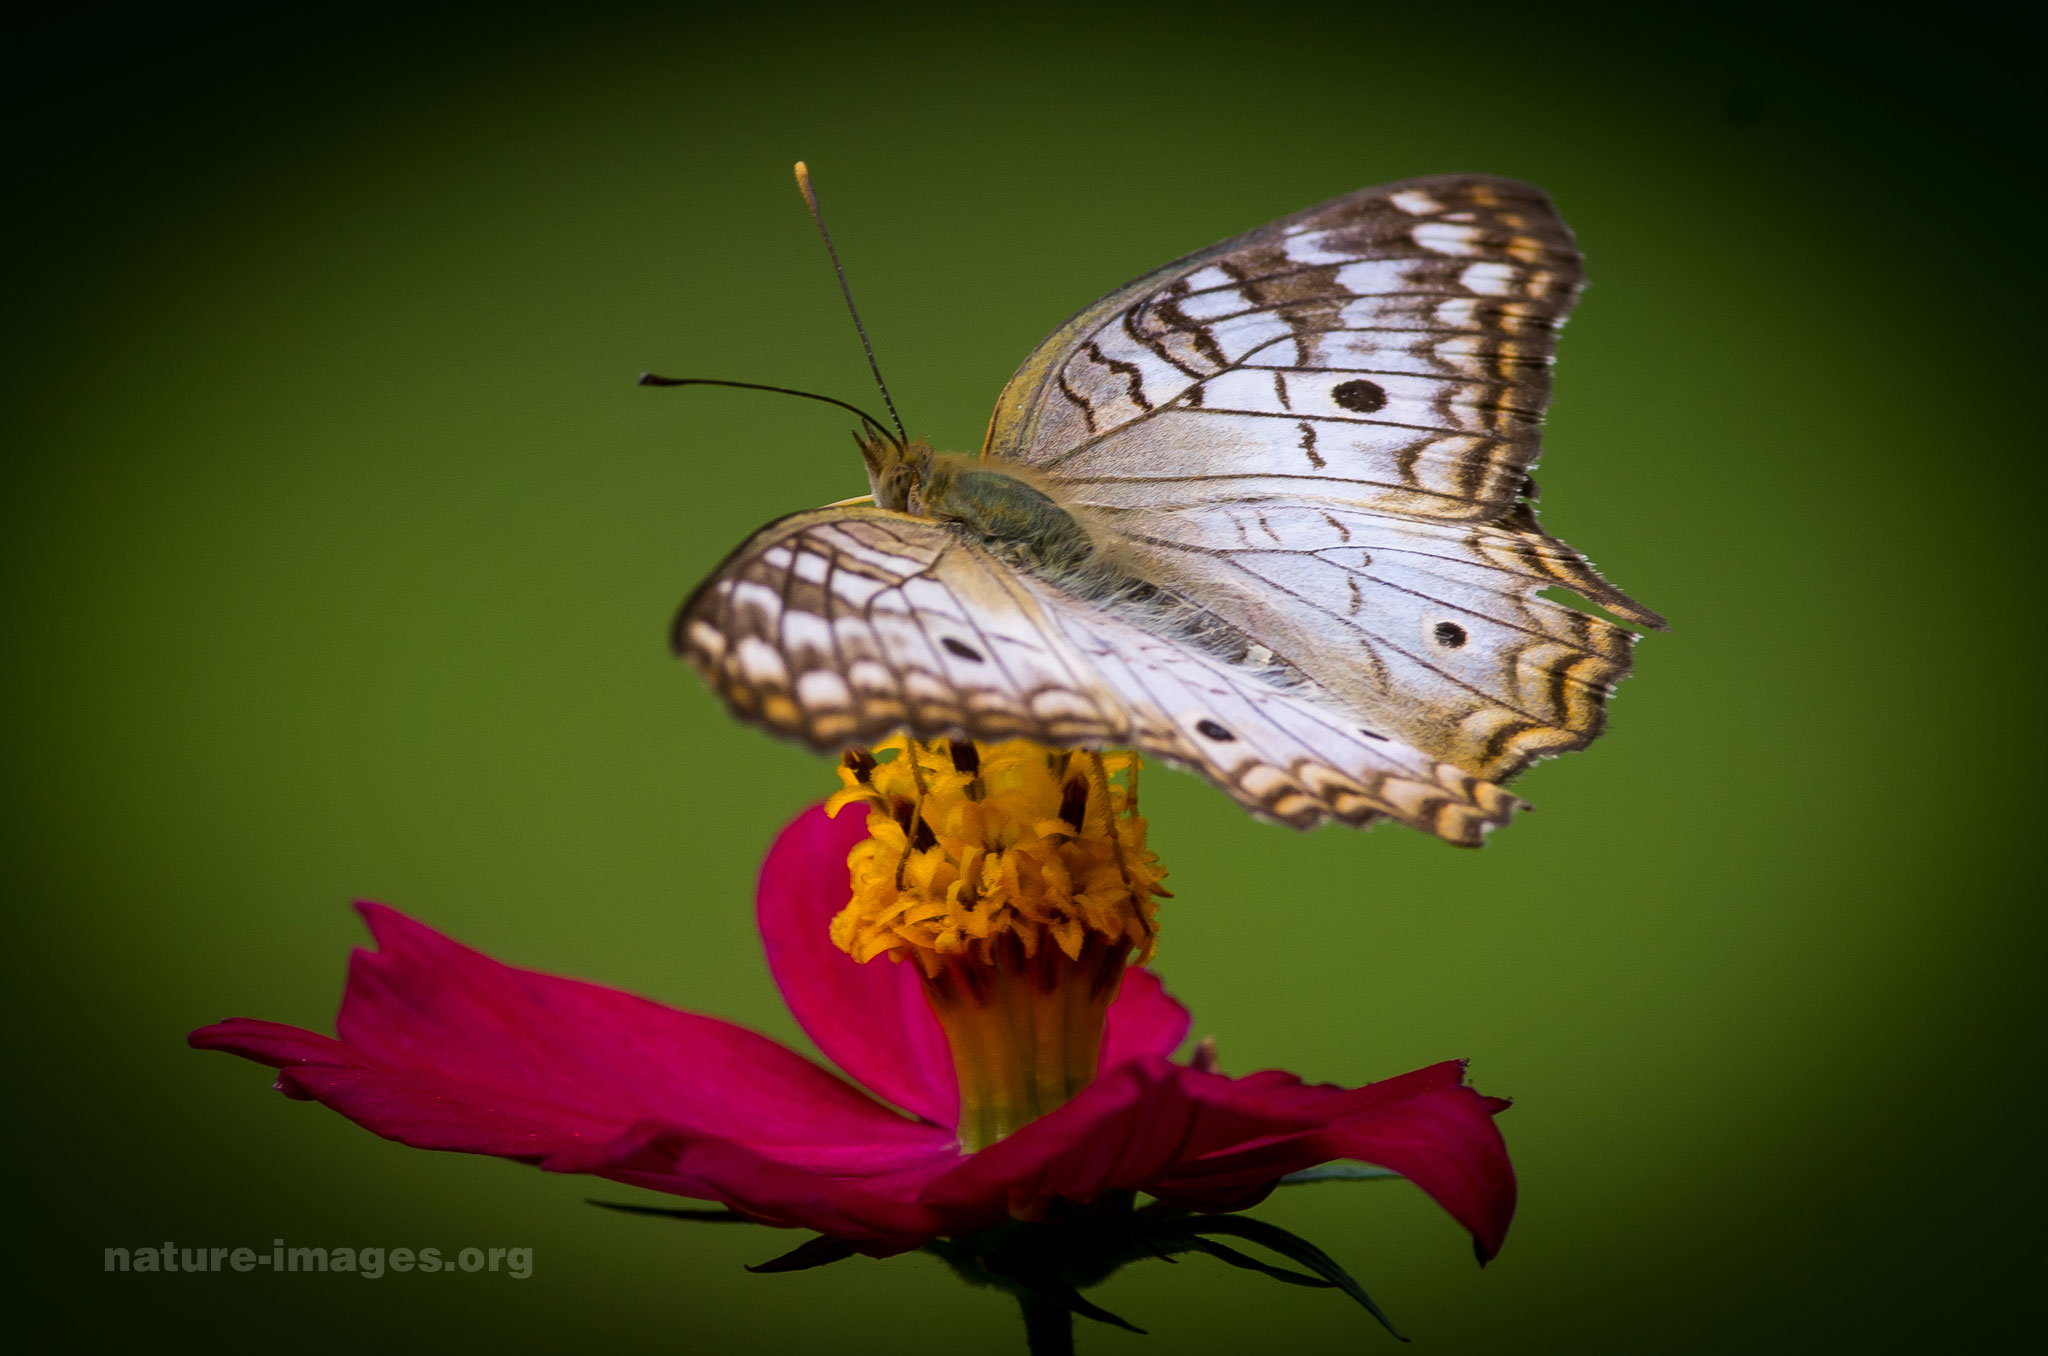 White Peacock Butterfly